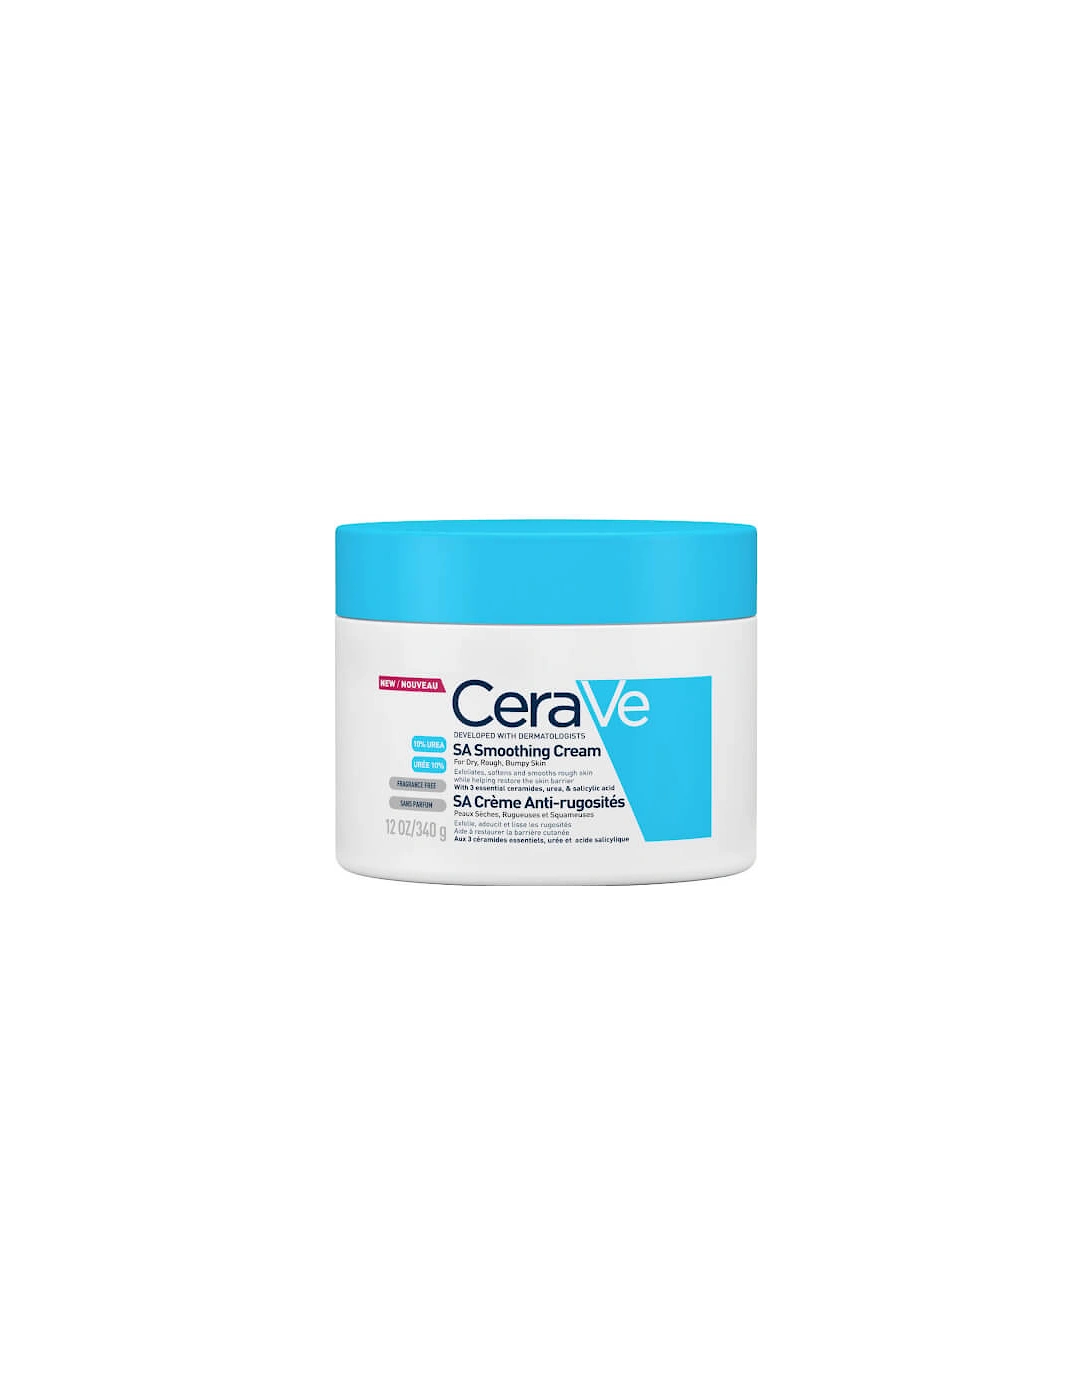 SA Smoothing Cream with Salicylic Acid for Dry, Rough & Bumpy Skin 340g - CeraVe, 2 of 1